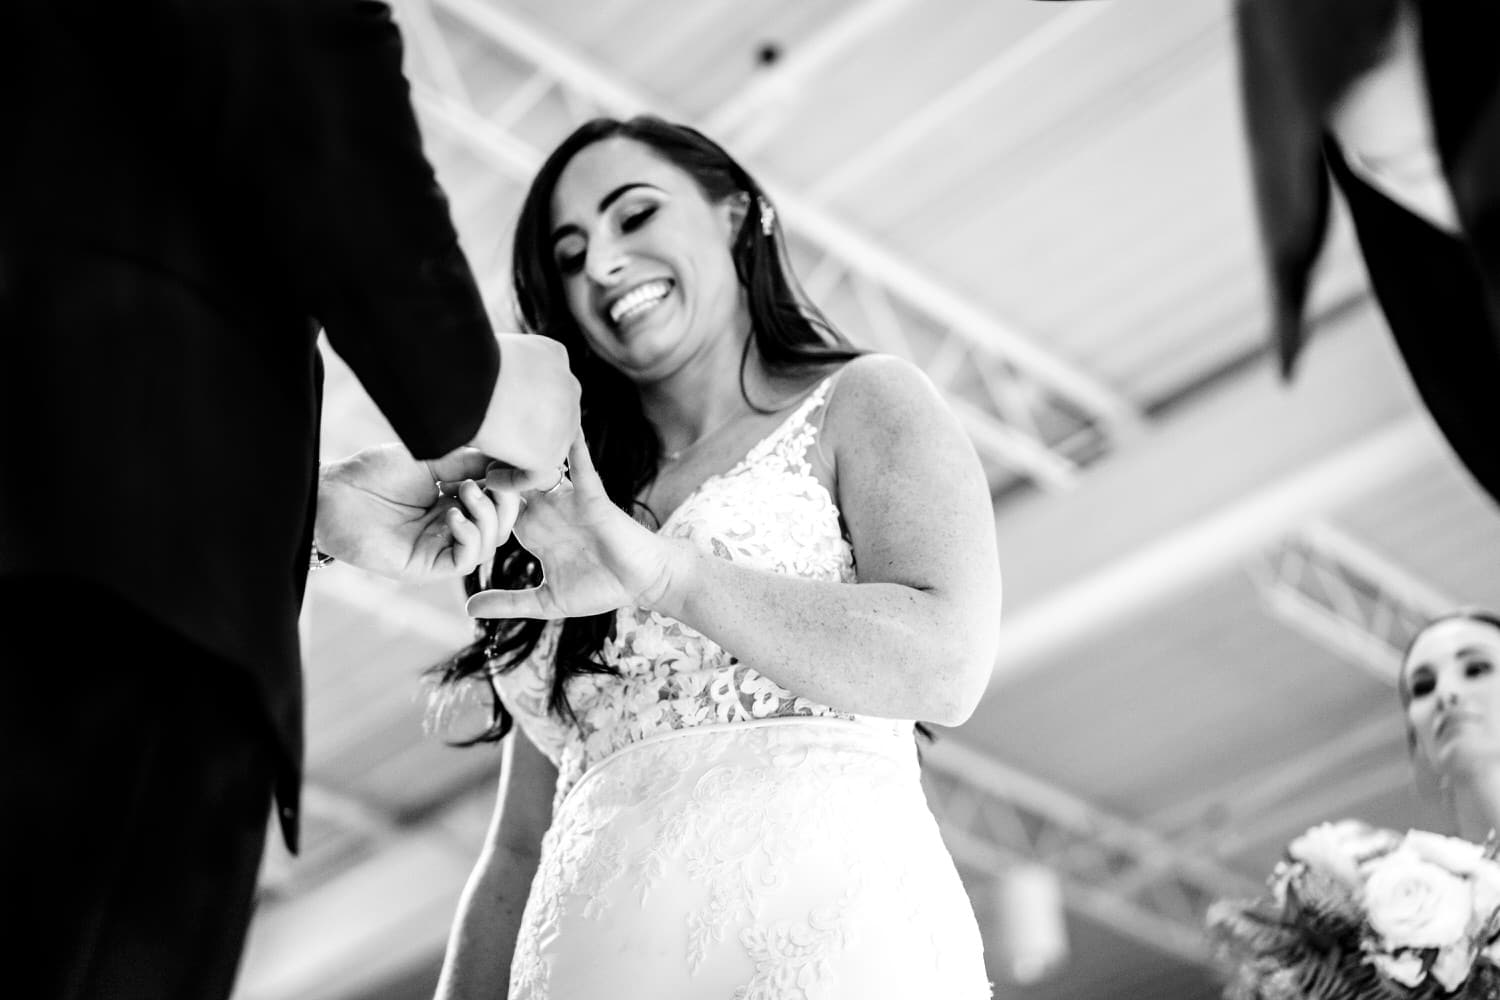 A candid black and white picture of a bride smiling at her groom as he puts a ring on her finger during their winter wedding ceremony at Pennway Place in Kansas City. 